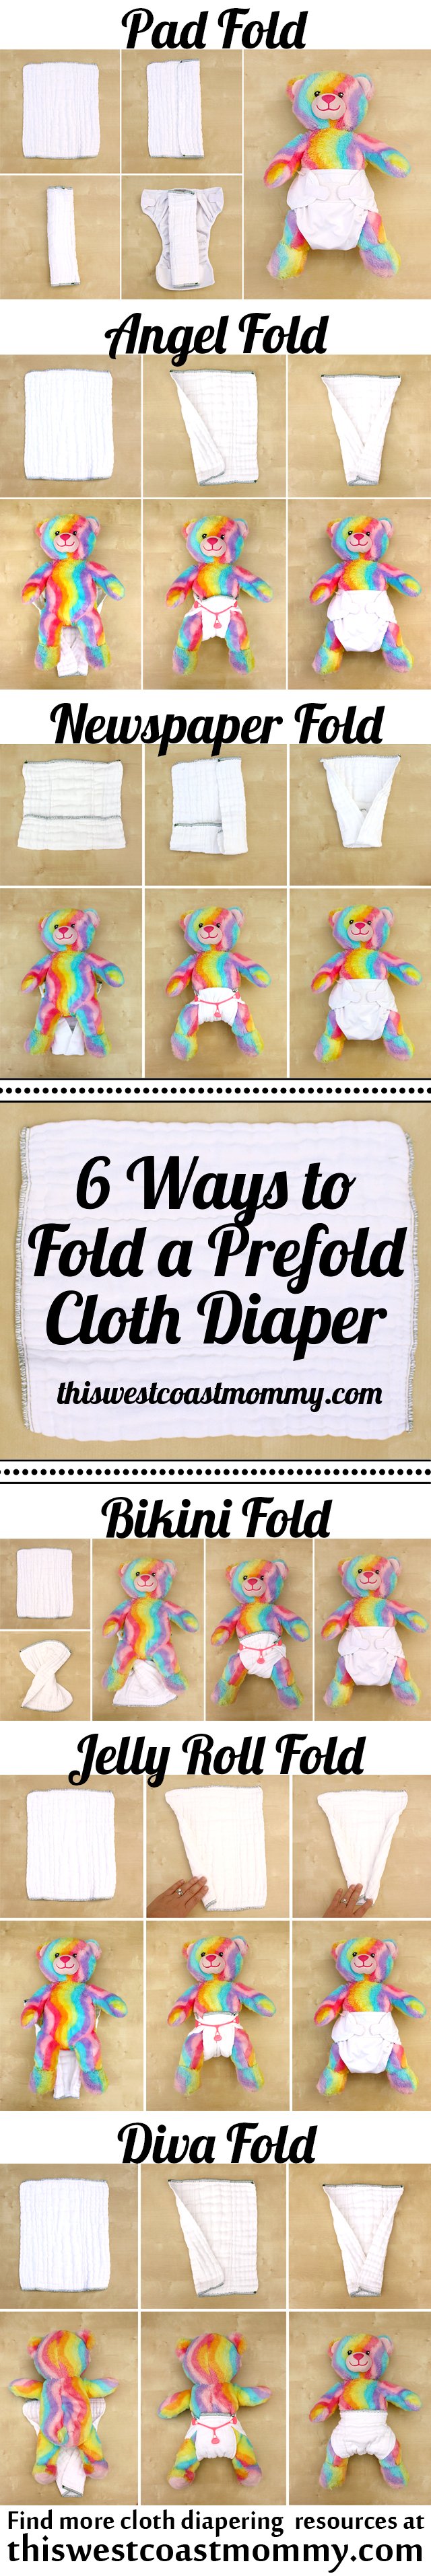 6 Ways to Fold a Prefold Cloth Diaper | In this cloth diaper tutorial, I show you how to fold a prefold diaper 6 different ways, with tips and recommendations for each.